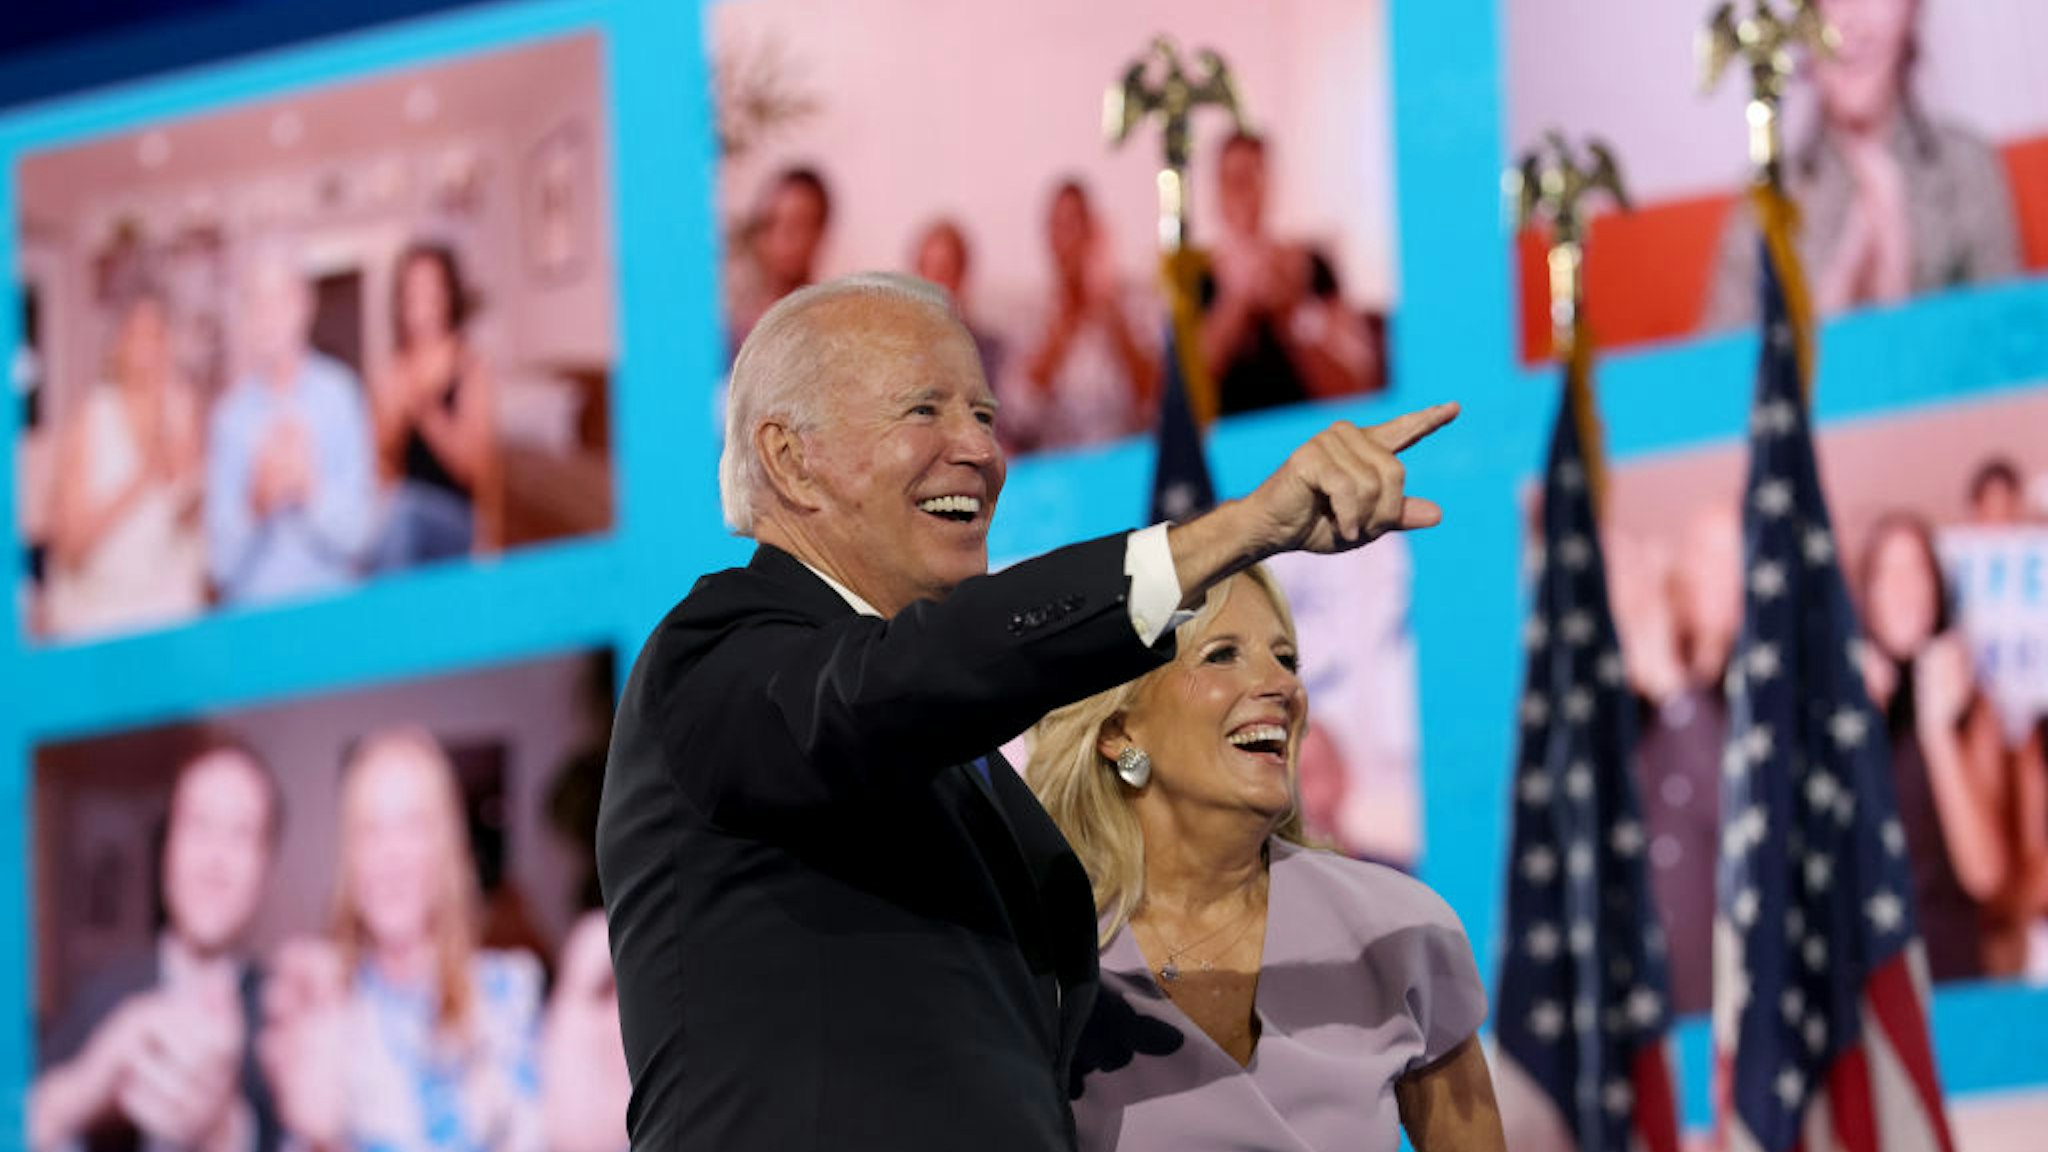 WILMINGTON, DELAWARE - AUGUST 20: : Democratic presidential nominee Joe Biden and his wife Dr. Jill Biden wave to supporters via video teleconference after Biden delivered his acceptance speech on the fourth night of the Democratic National Convention from the Chase Center on August 20, 2020 in Wilmington, Delaware. The convention, which was once expected to draw 50,000 people to Milwaukee, Wisconsin, is now taking place virtually due to the coronavirus pandemic. (Photo by Win McNamee/Getty Images)